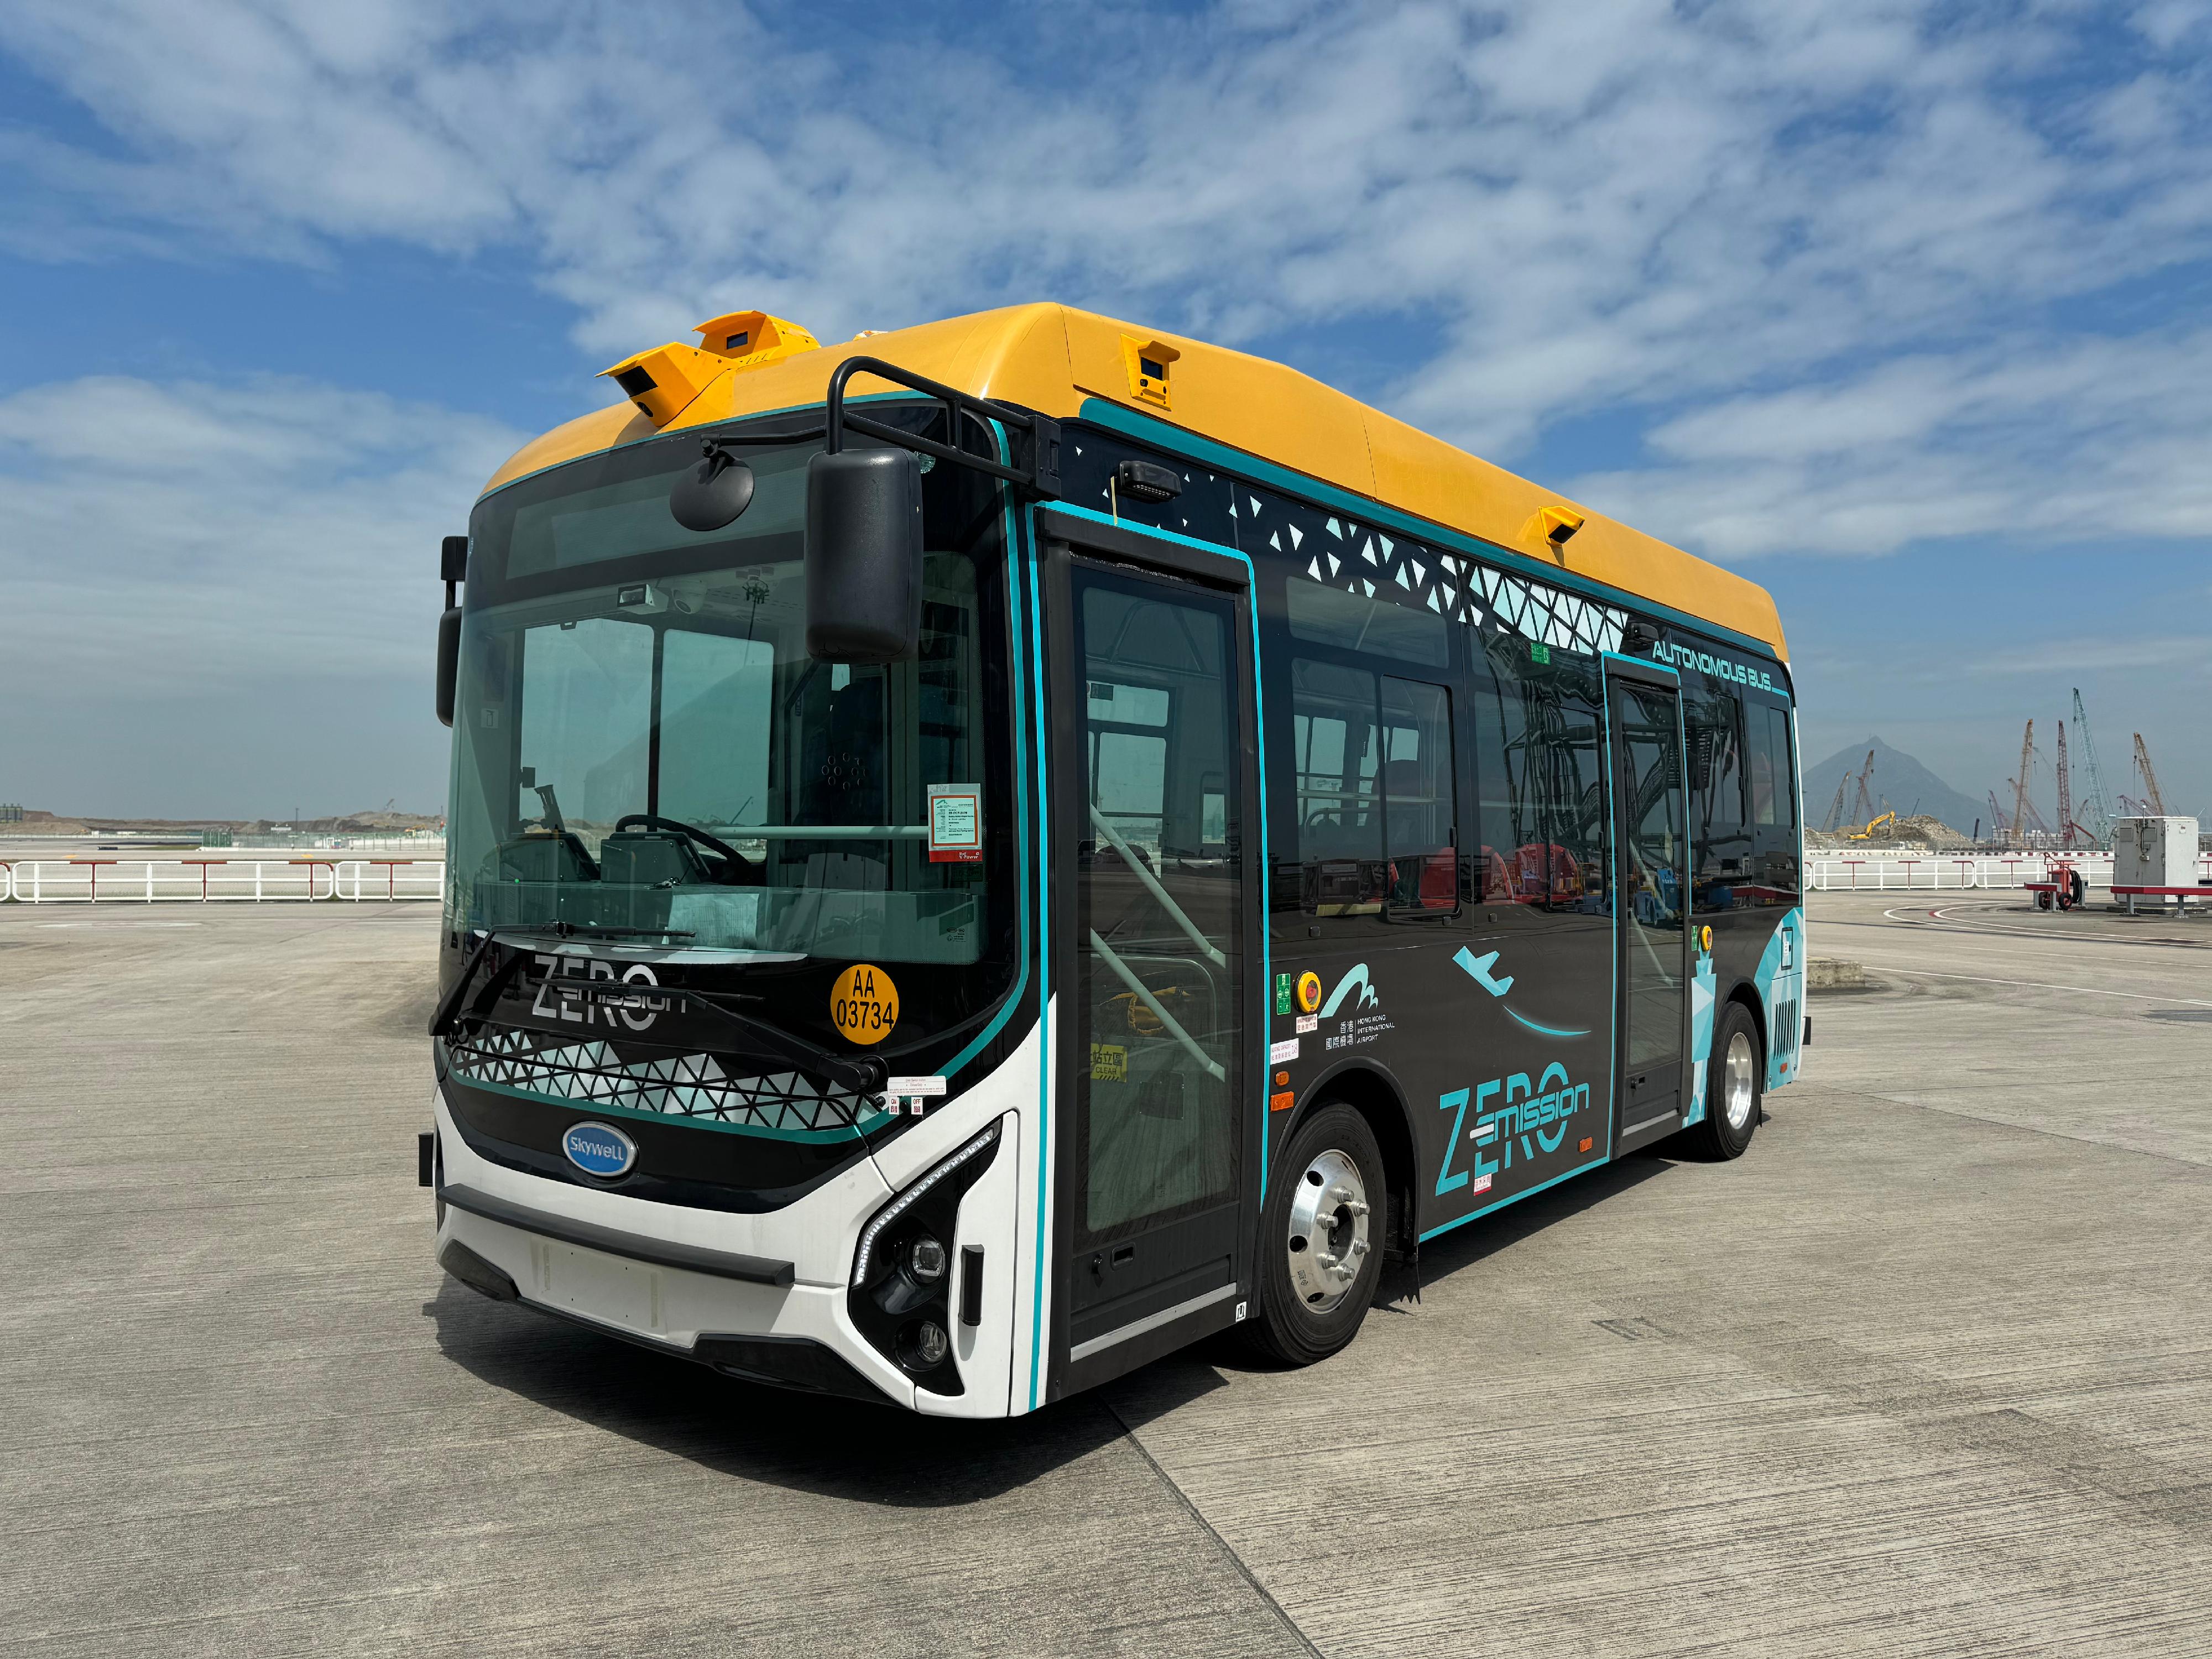 AI driverless technology company UISEE announced it will set up its international headquarters, a research and development centre and a corporate treasury centre in Hong Kong. Photo shows a UISEE driverless shuttle bus, used for taking staff to and from different destinations at the airport.